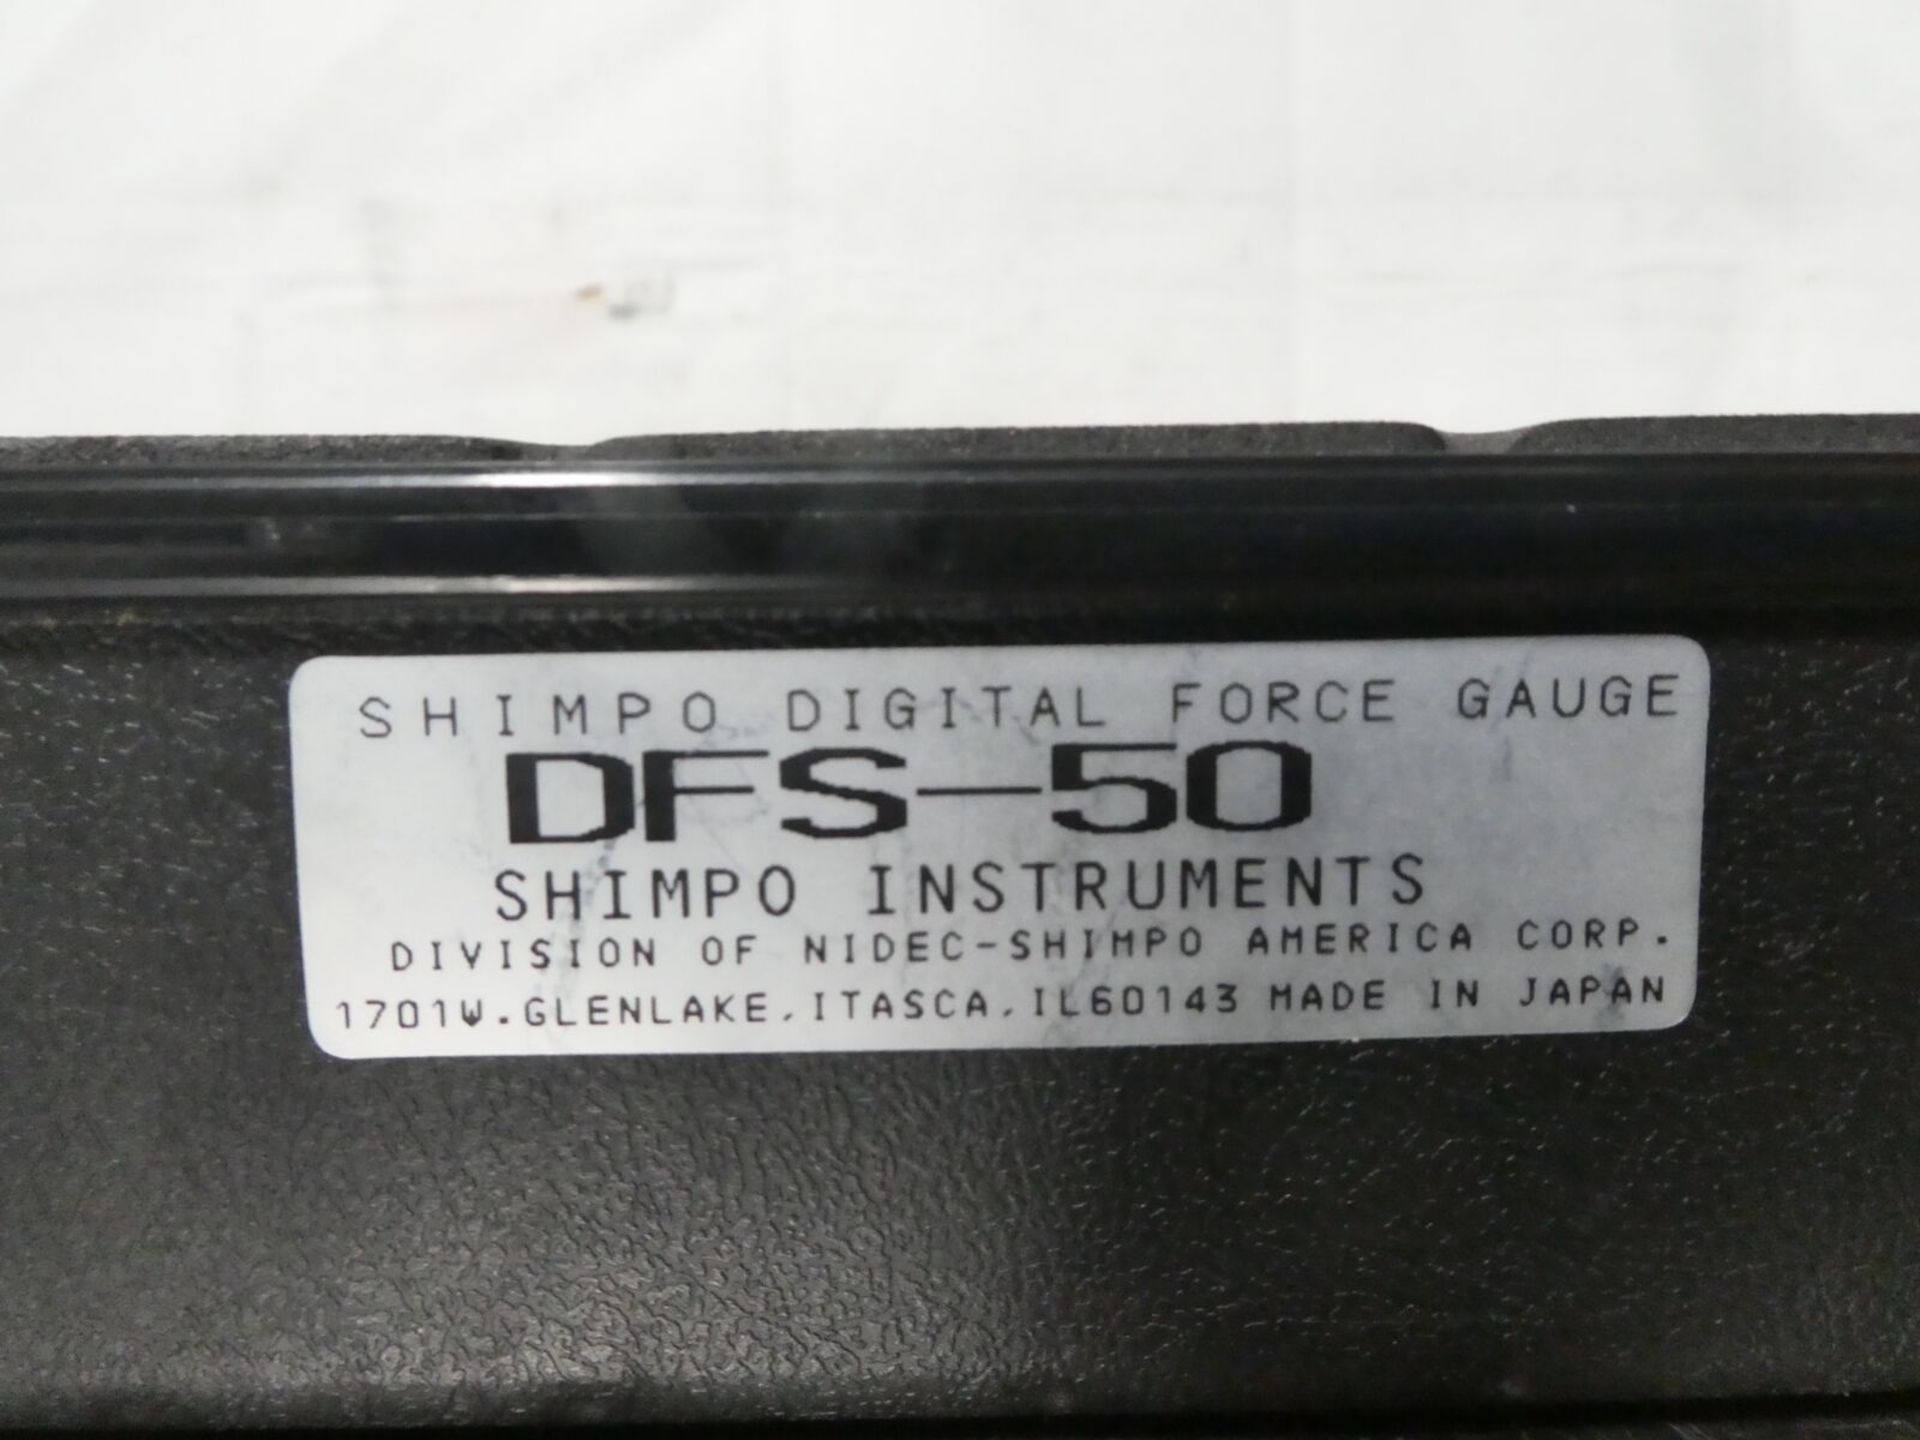 Shimpo Nidec Digital Force Gauge DFS-50 in Case w/ Accessories - Gilroy - Image 7 of 7